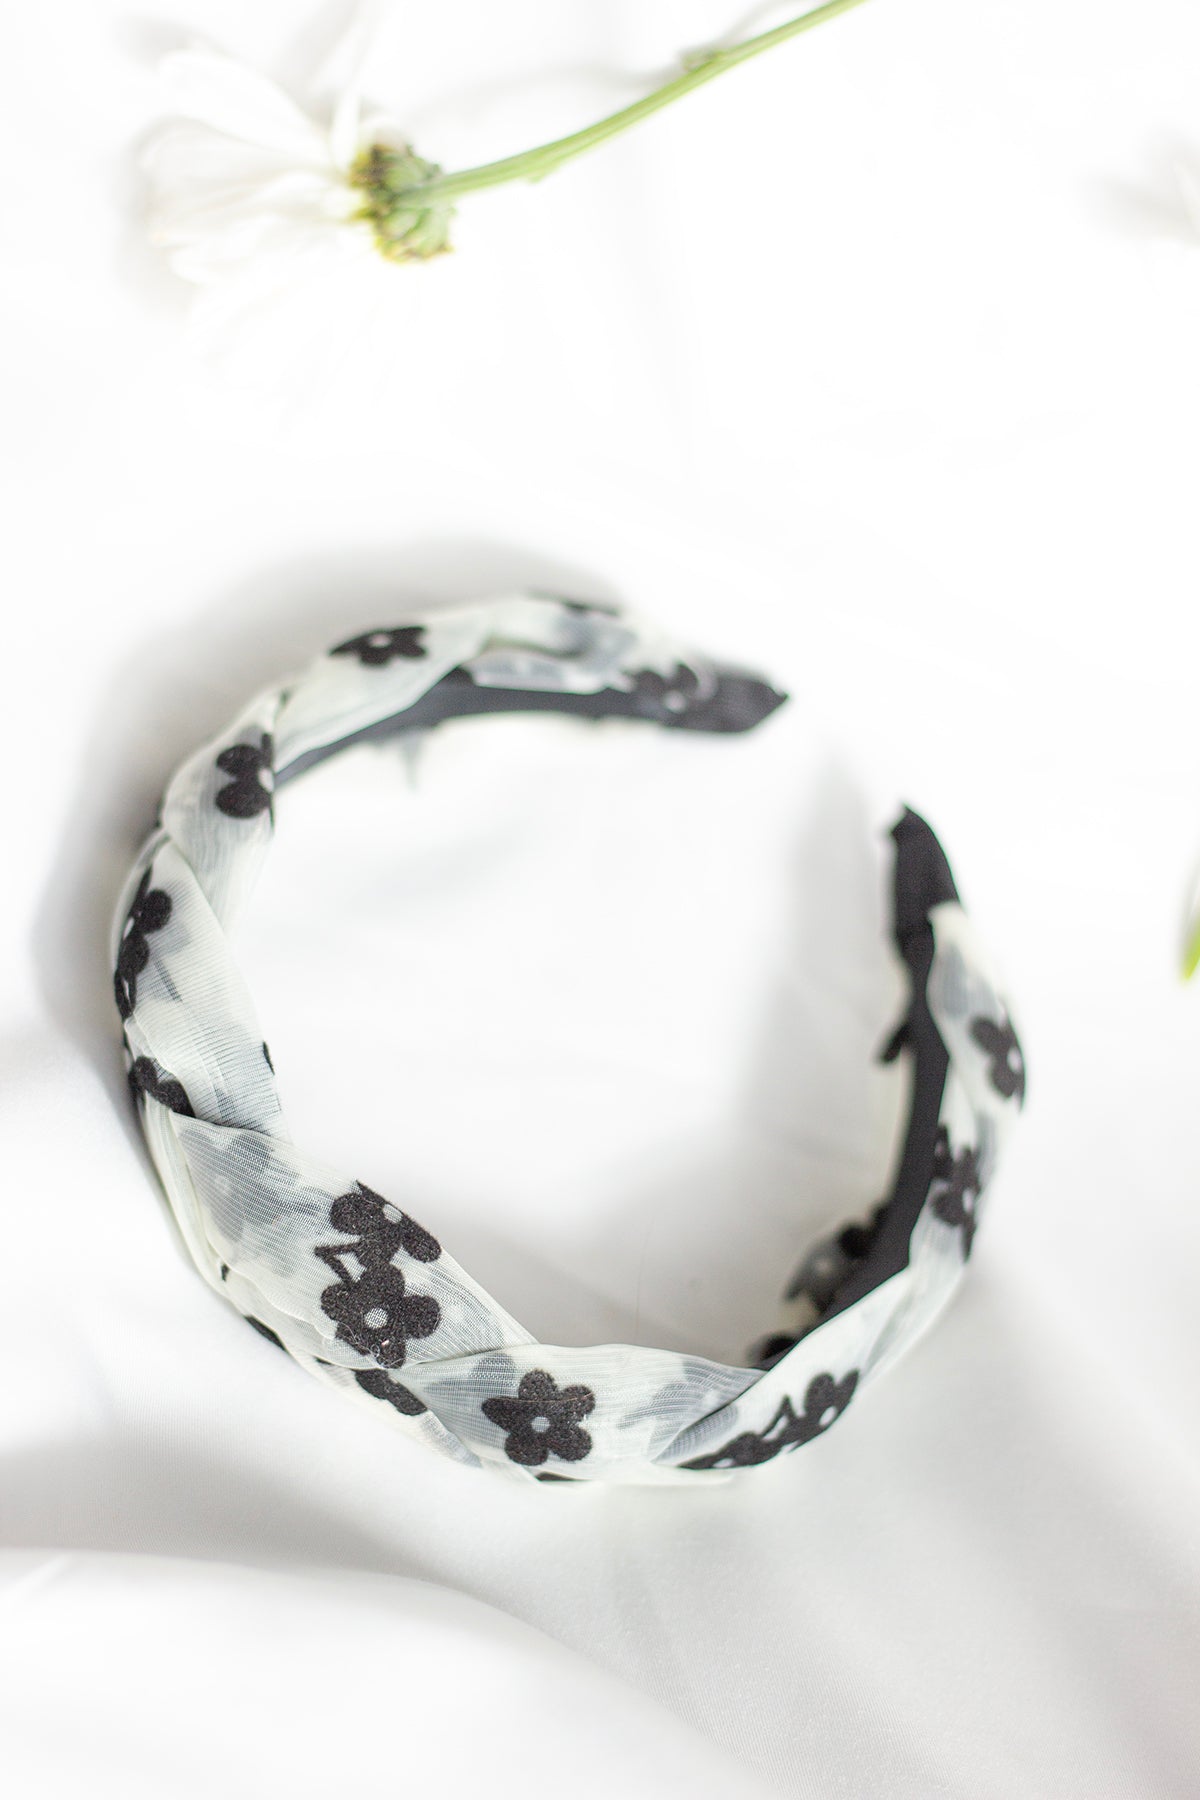 Netted Plaited Floral Headband - Sugar + Style